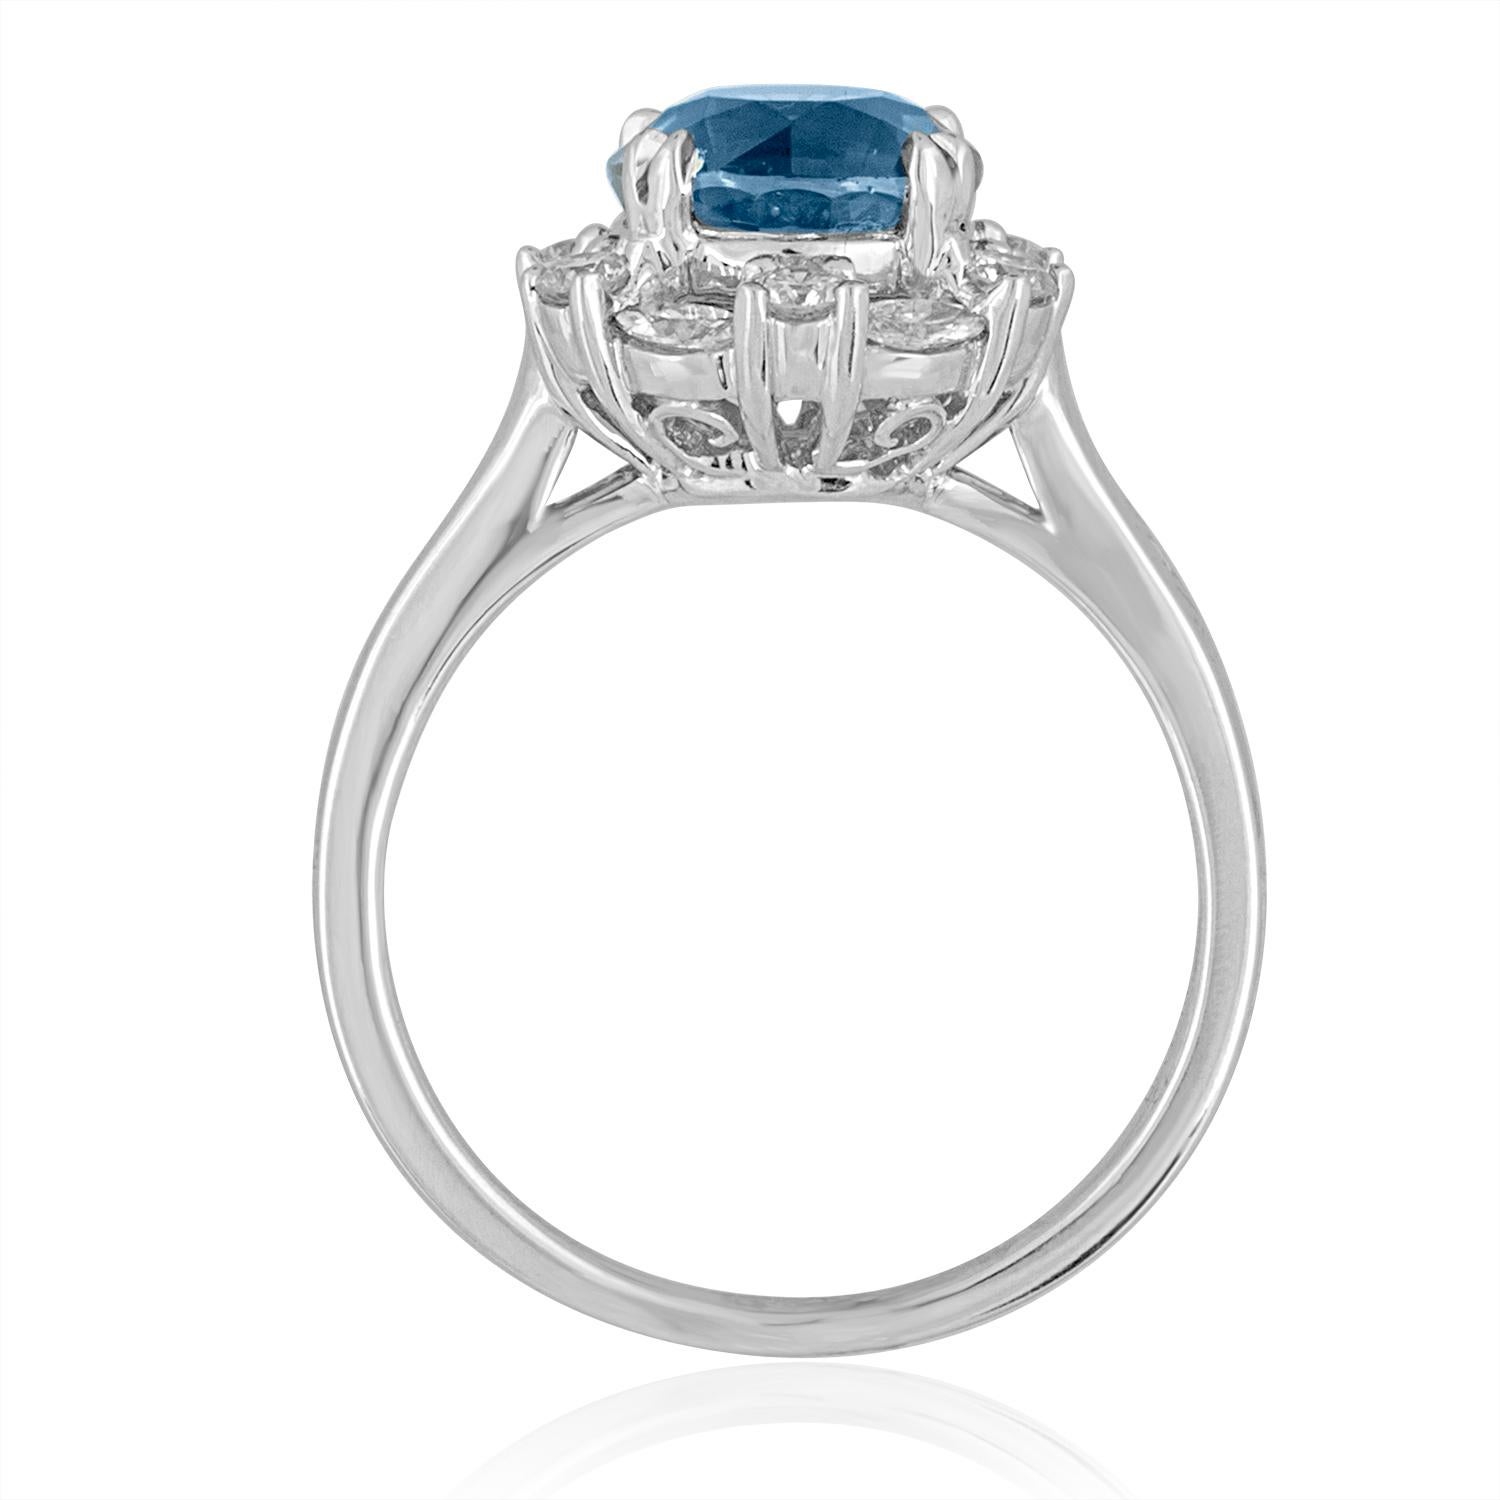 Beautiful Natural Sky Blue Sapphire Halo Diamond Ring
The ring is 18K White Gold
There are 0.49 Carats in Diamonds F/G VS/SI
The round sapphire is 2.97 Carats, NO HEAT.
The Sapphire is certified by LAPIS.
The ring is a size 6.75
The ring weighs 4.7